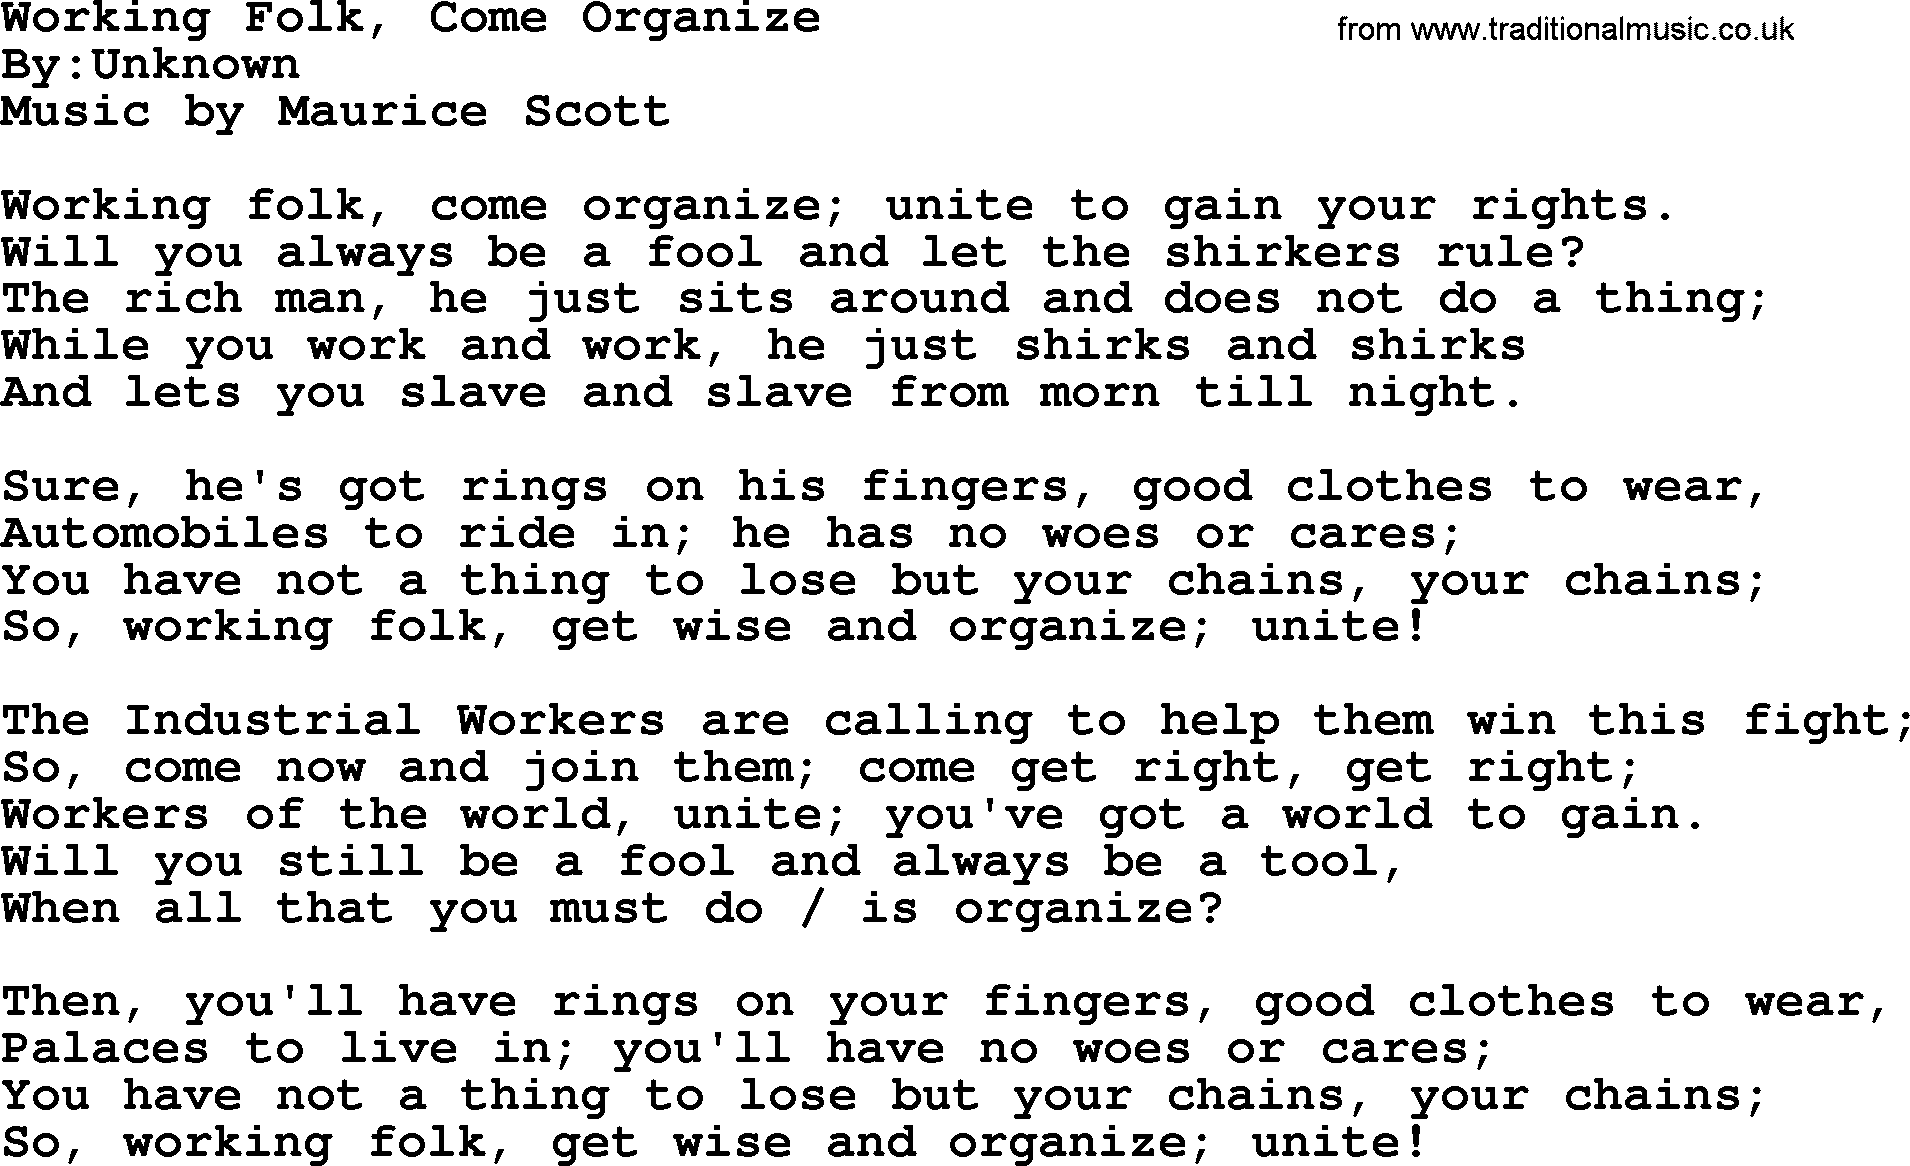 Political, Solidarity, Workers or Union song: Working Folk Come Organize, lyrics